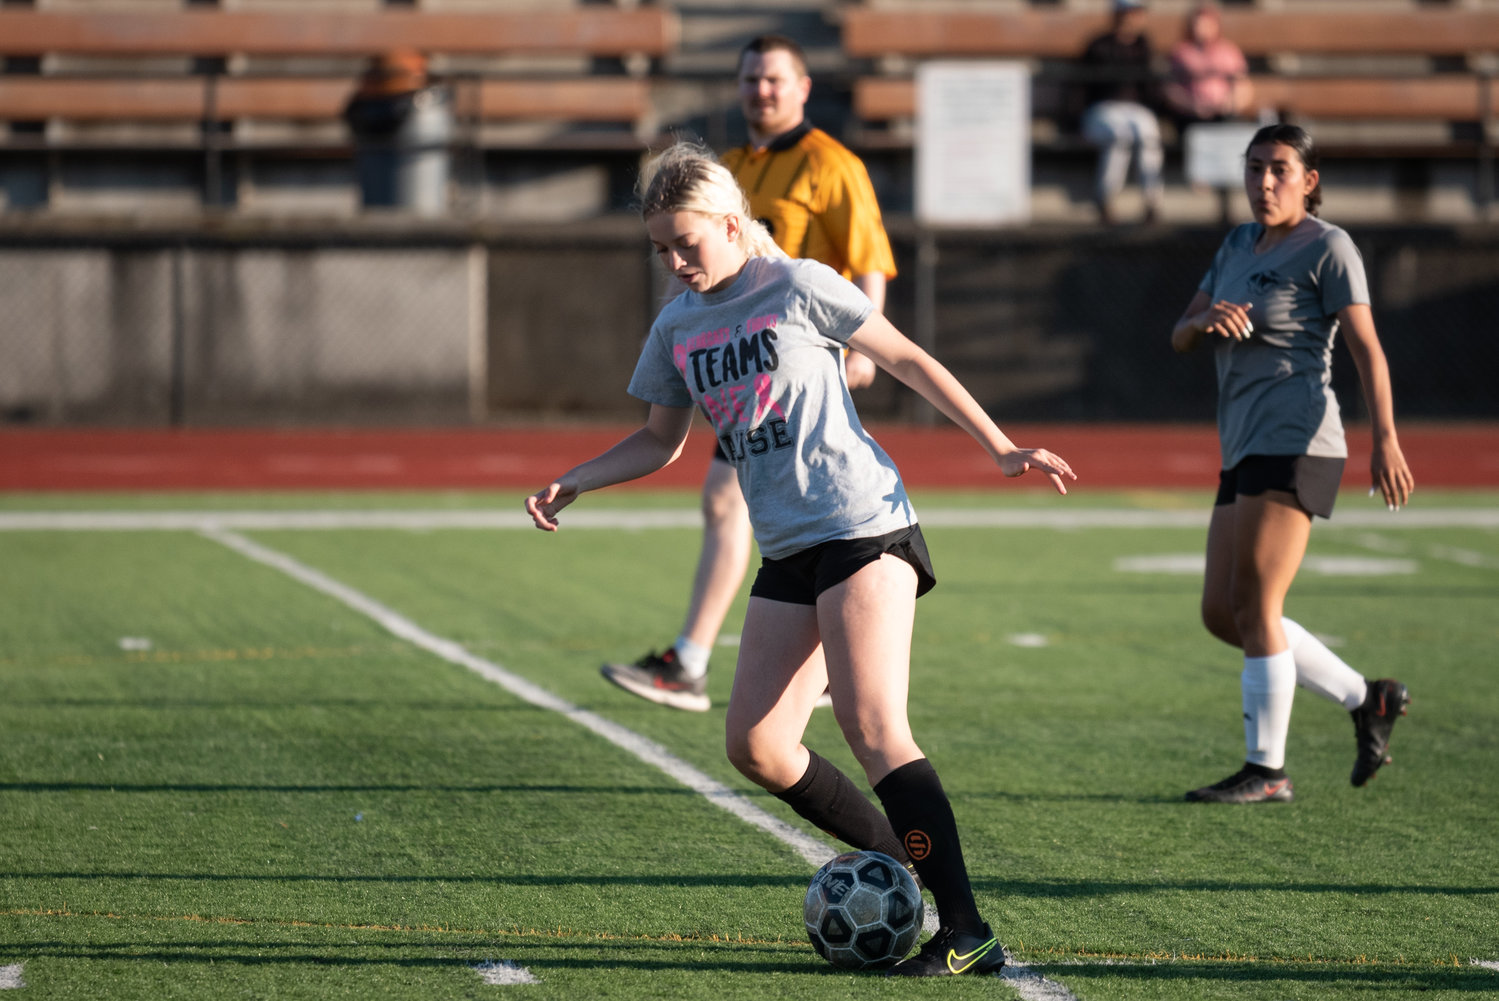 Centralia's Trinity Smith takes the ball upfield against Tenino in a scrimmage at Tiger Stadium Thursday.